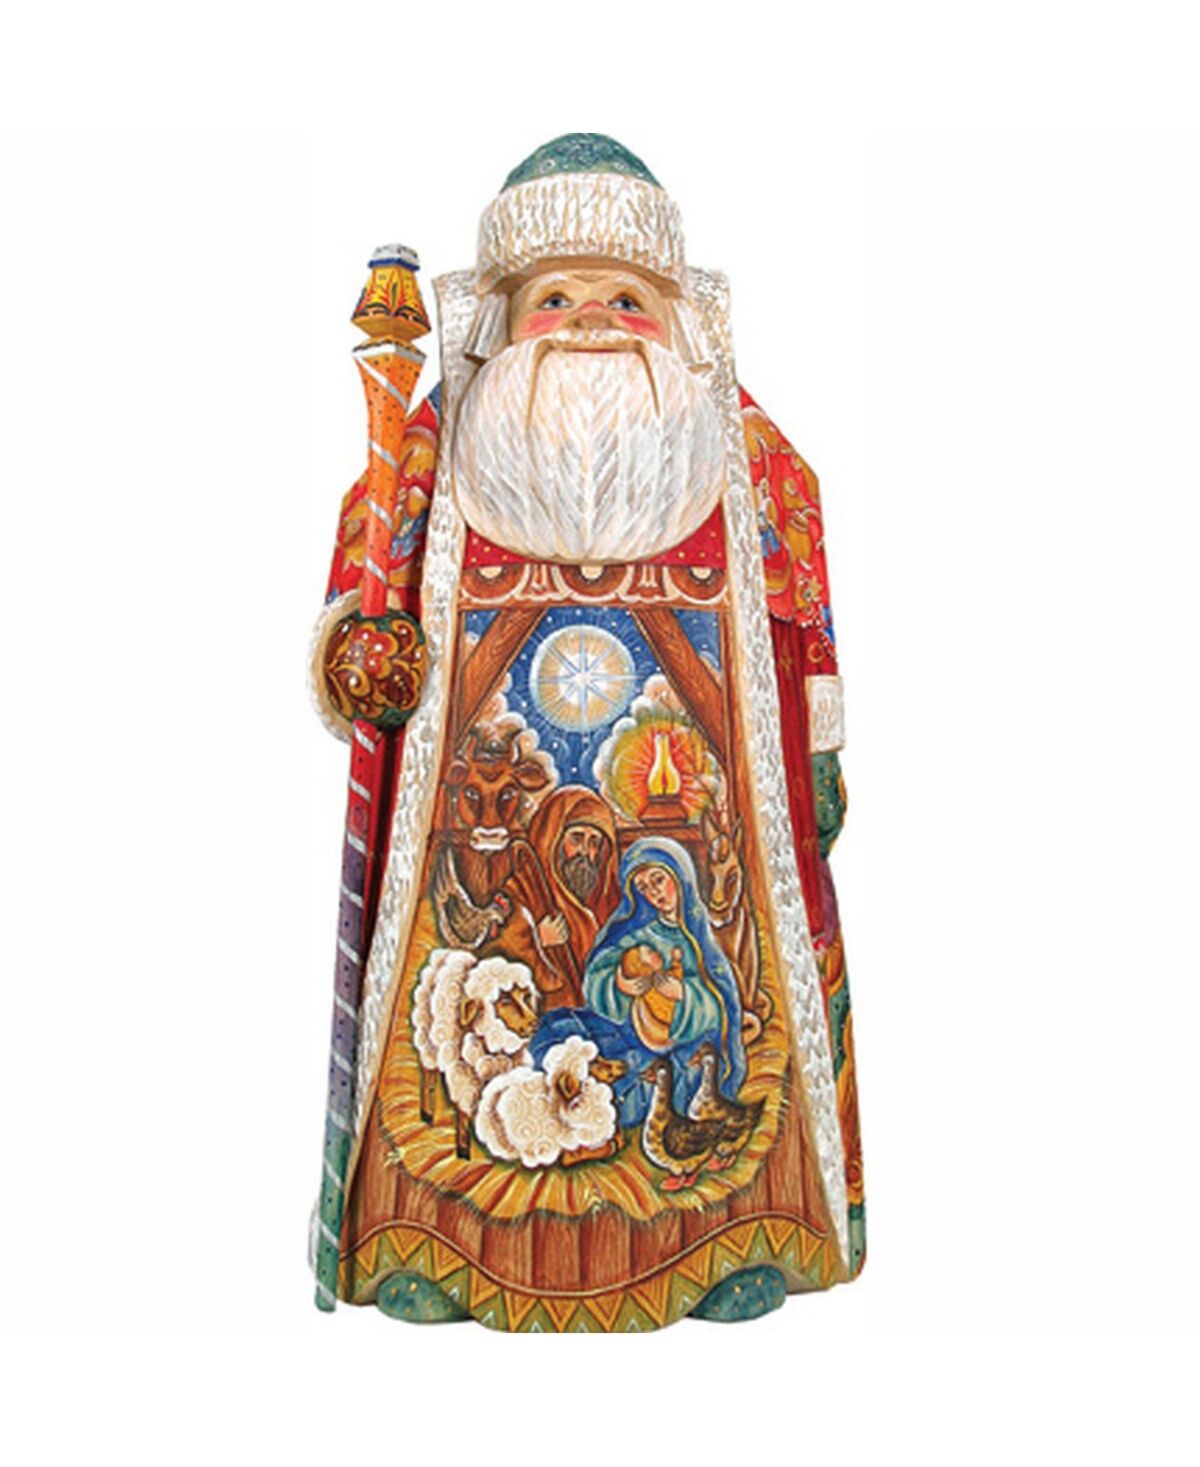 G.DeBrekht Woodcarved and Hand Painted Away In The Manger Santa Claus Figurine - Multi